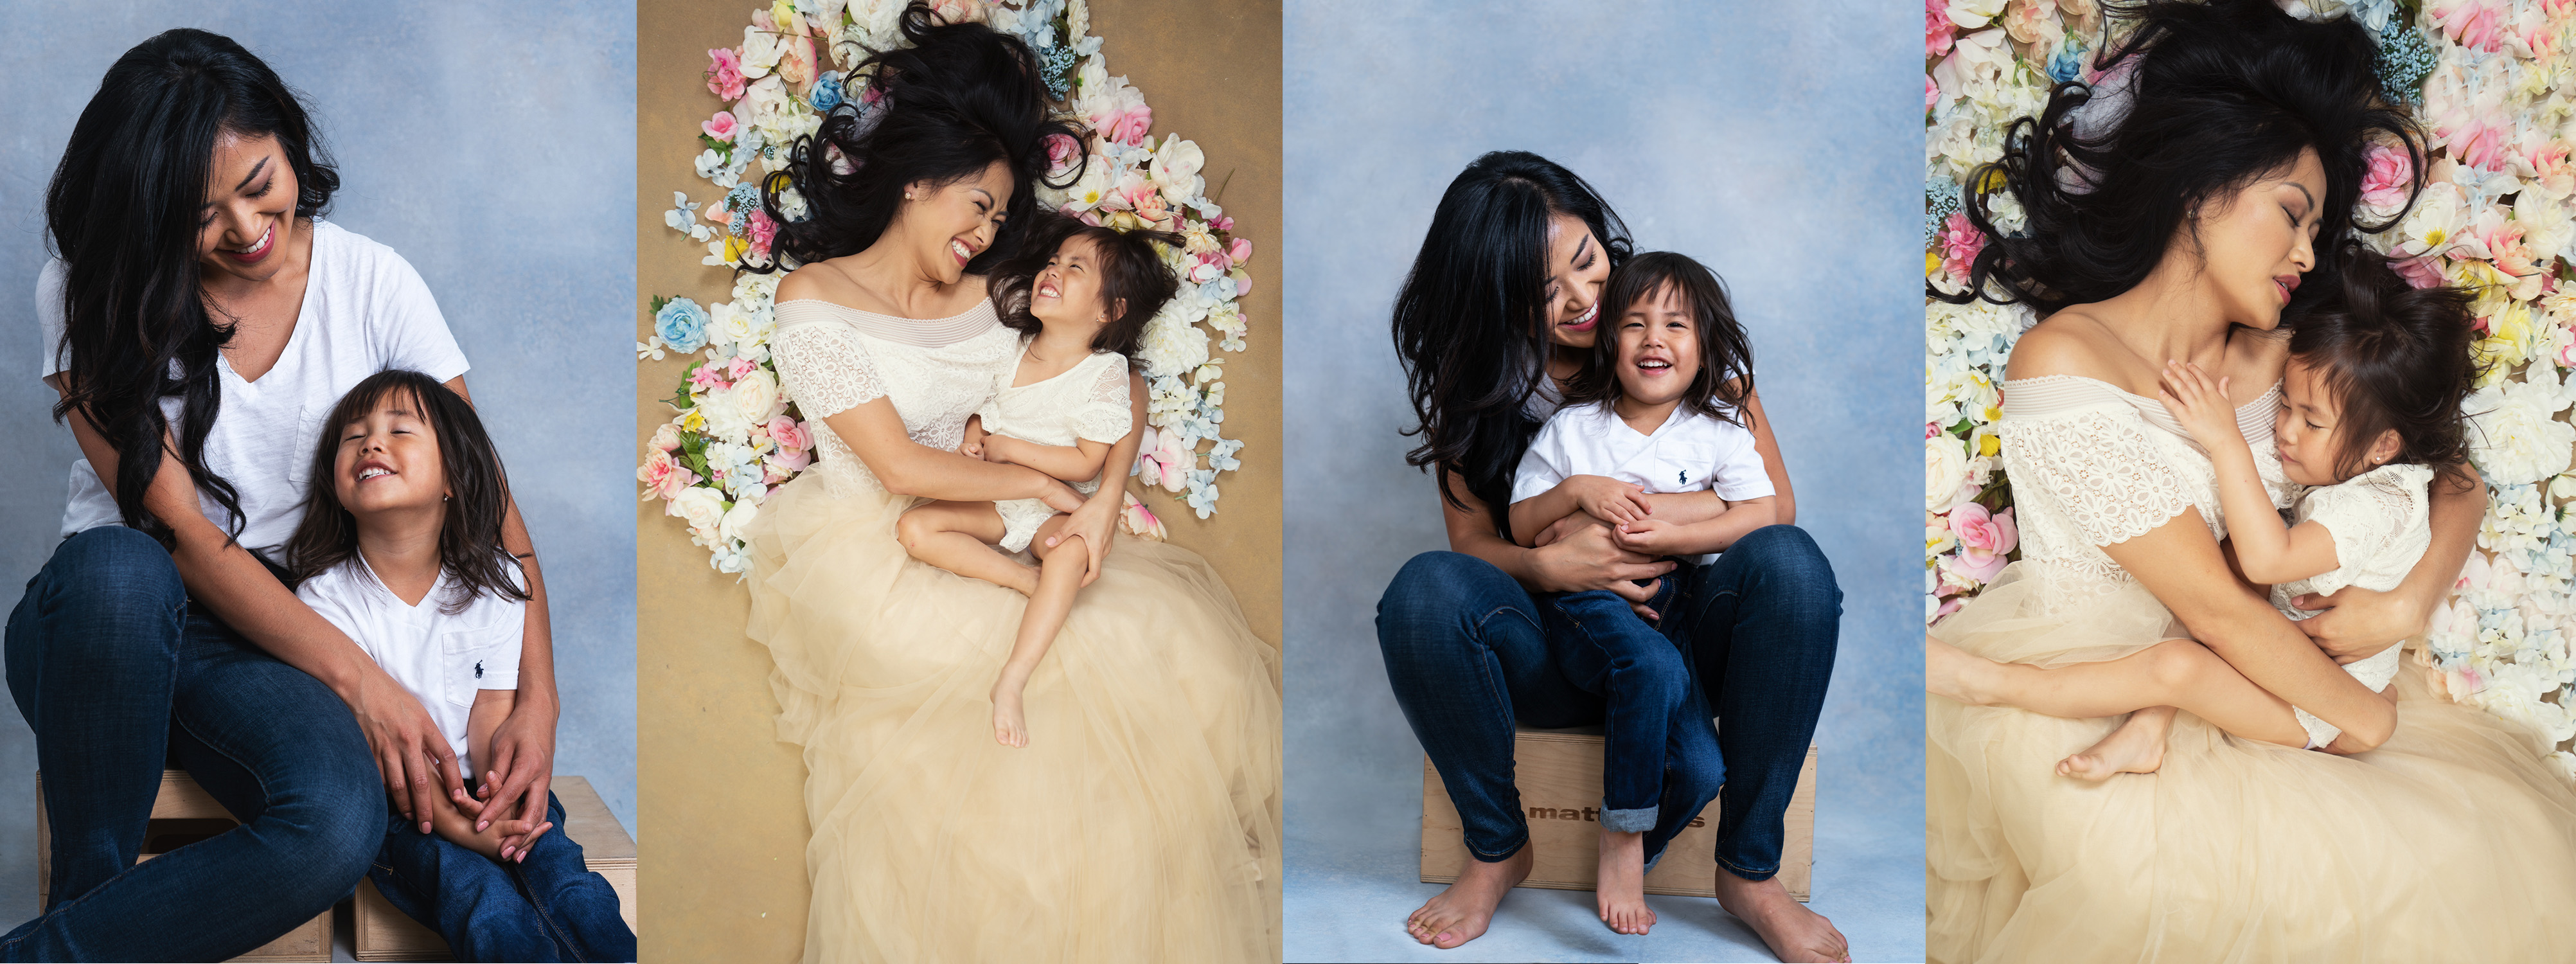 daniel michalek recommends mother daughters photoshoot pic